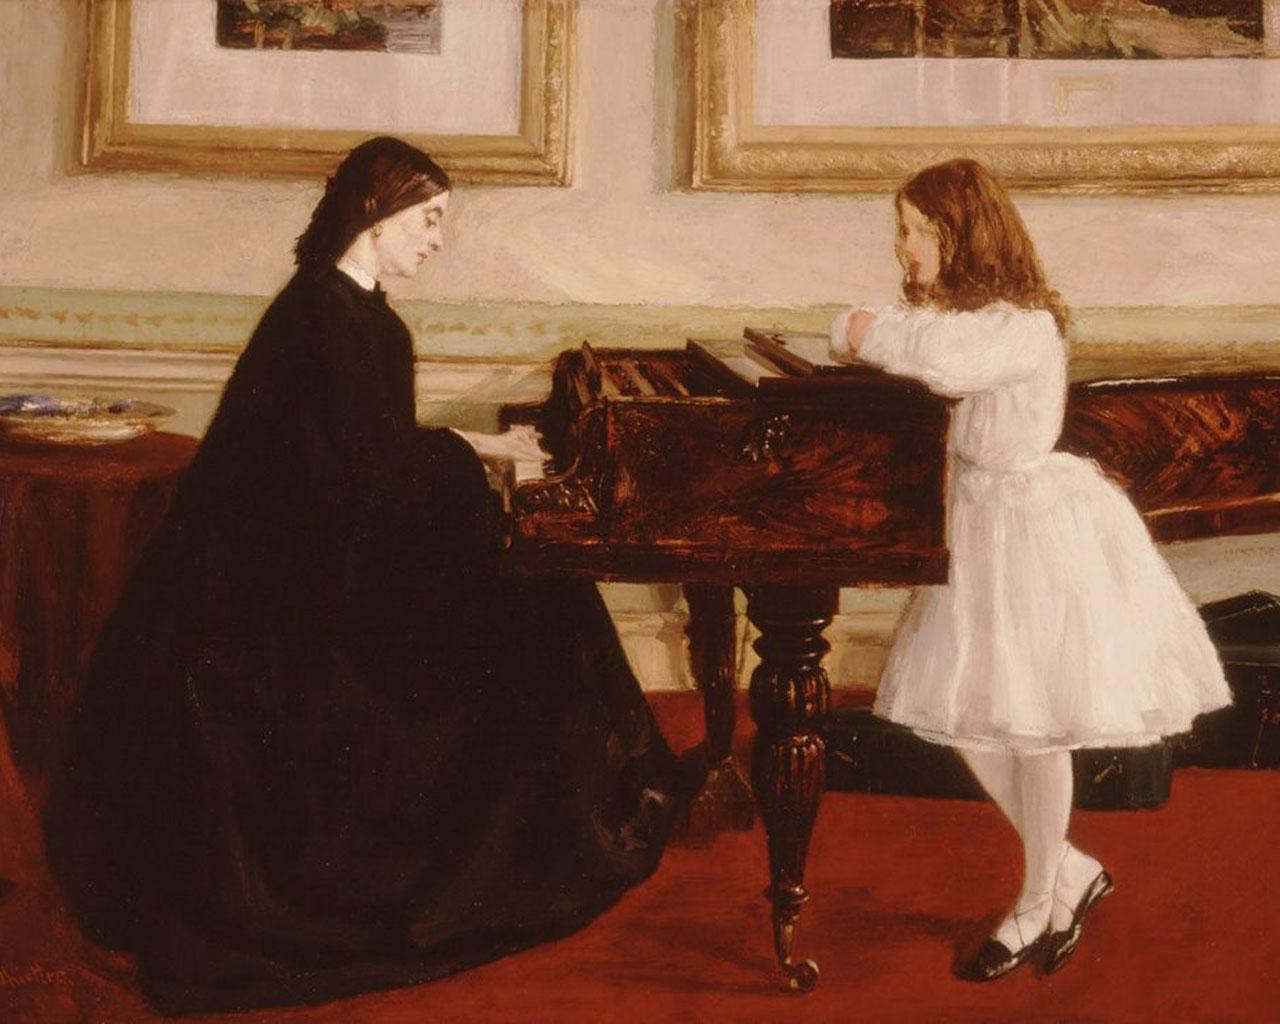 James McNeill Whistler - At the Piano (1859) Wallpaper #1 1280 x 1024 